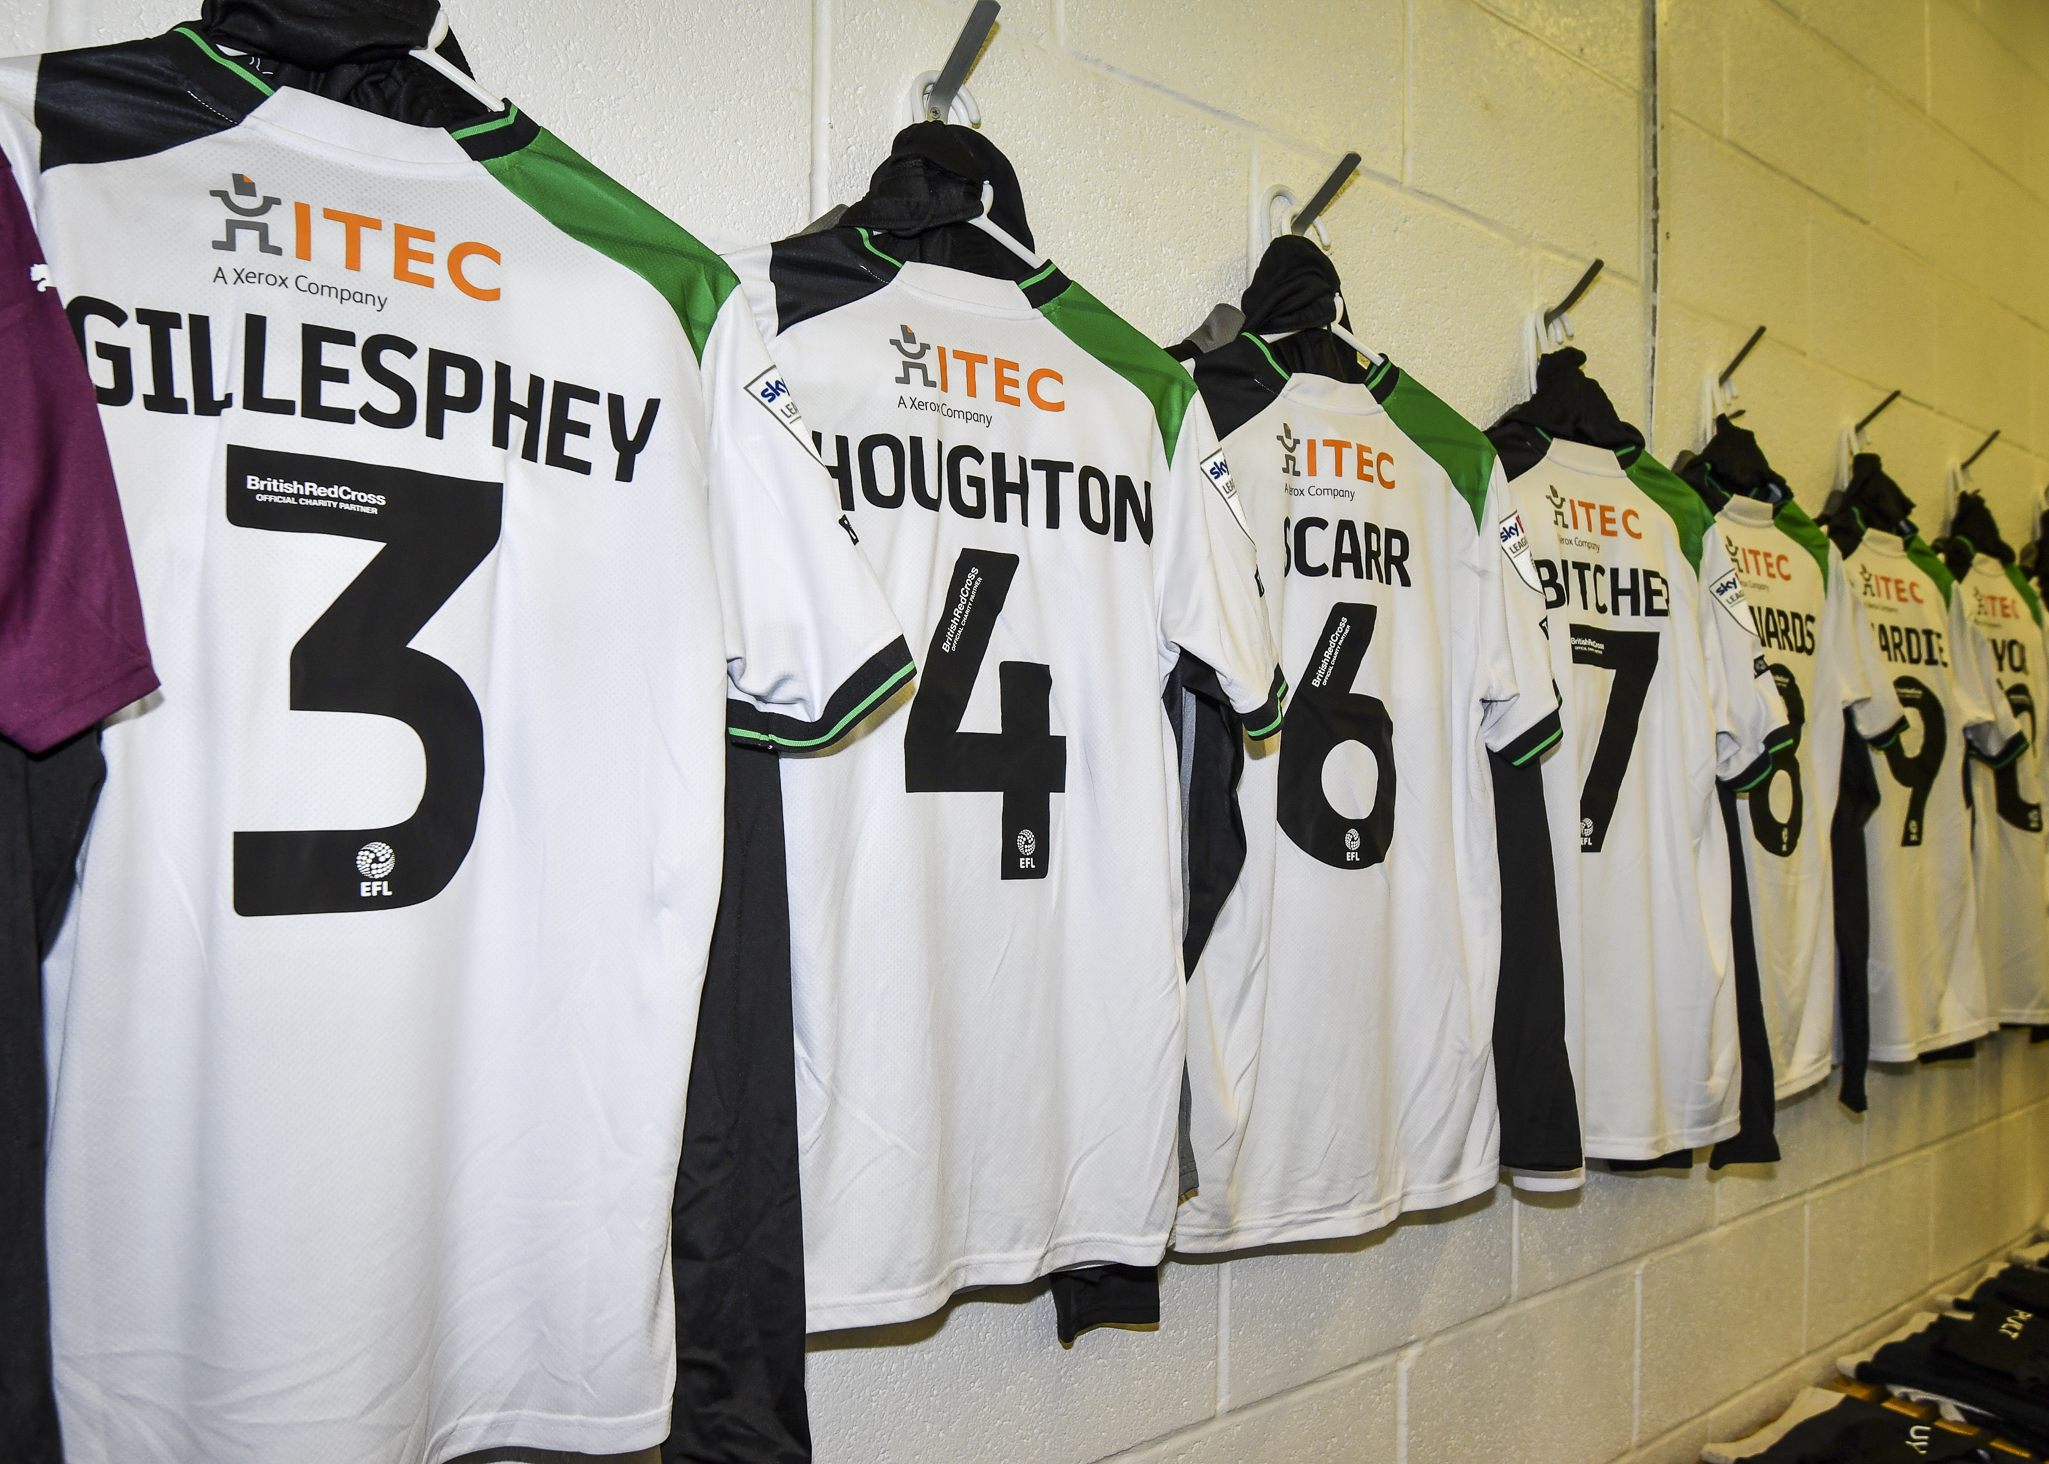 Away shirts in dressing room